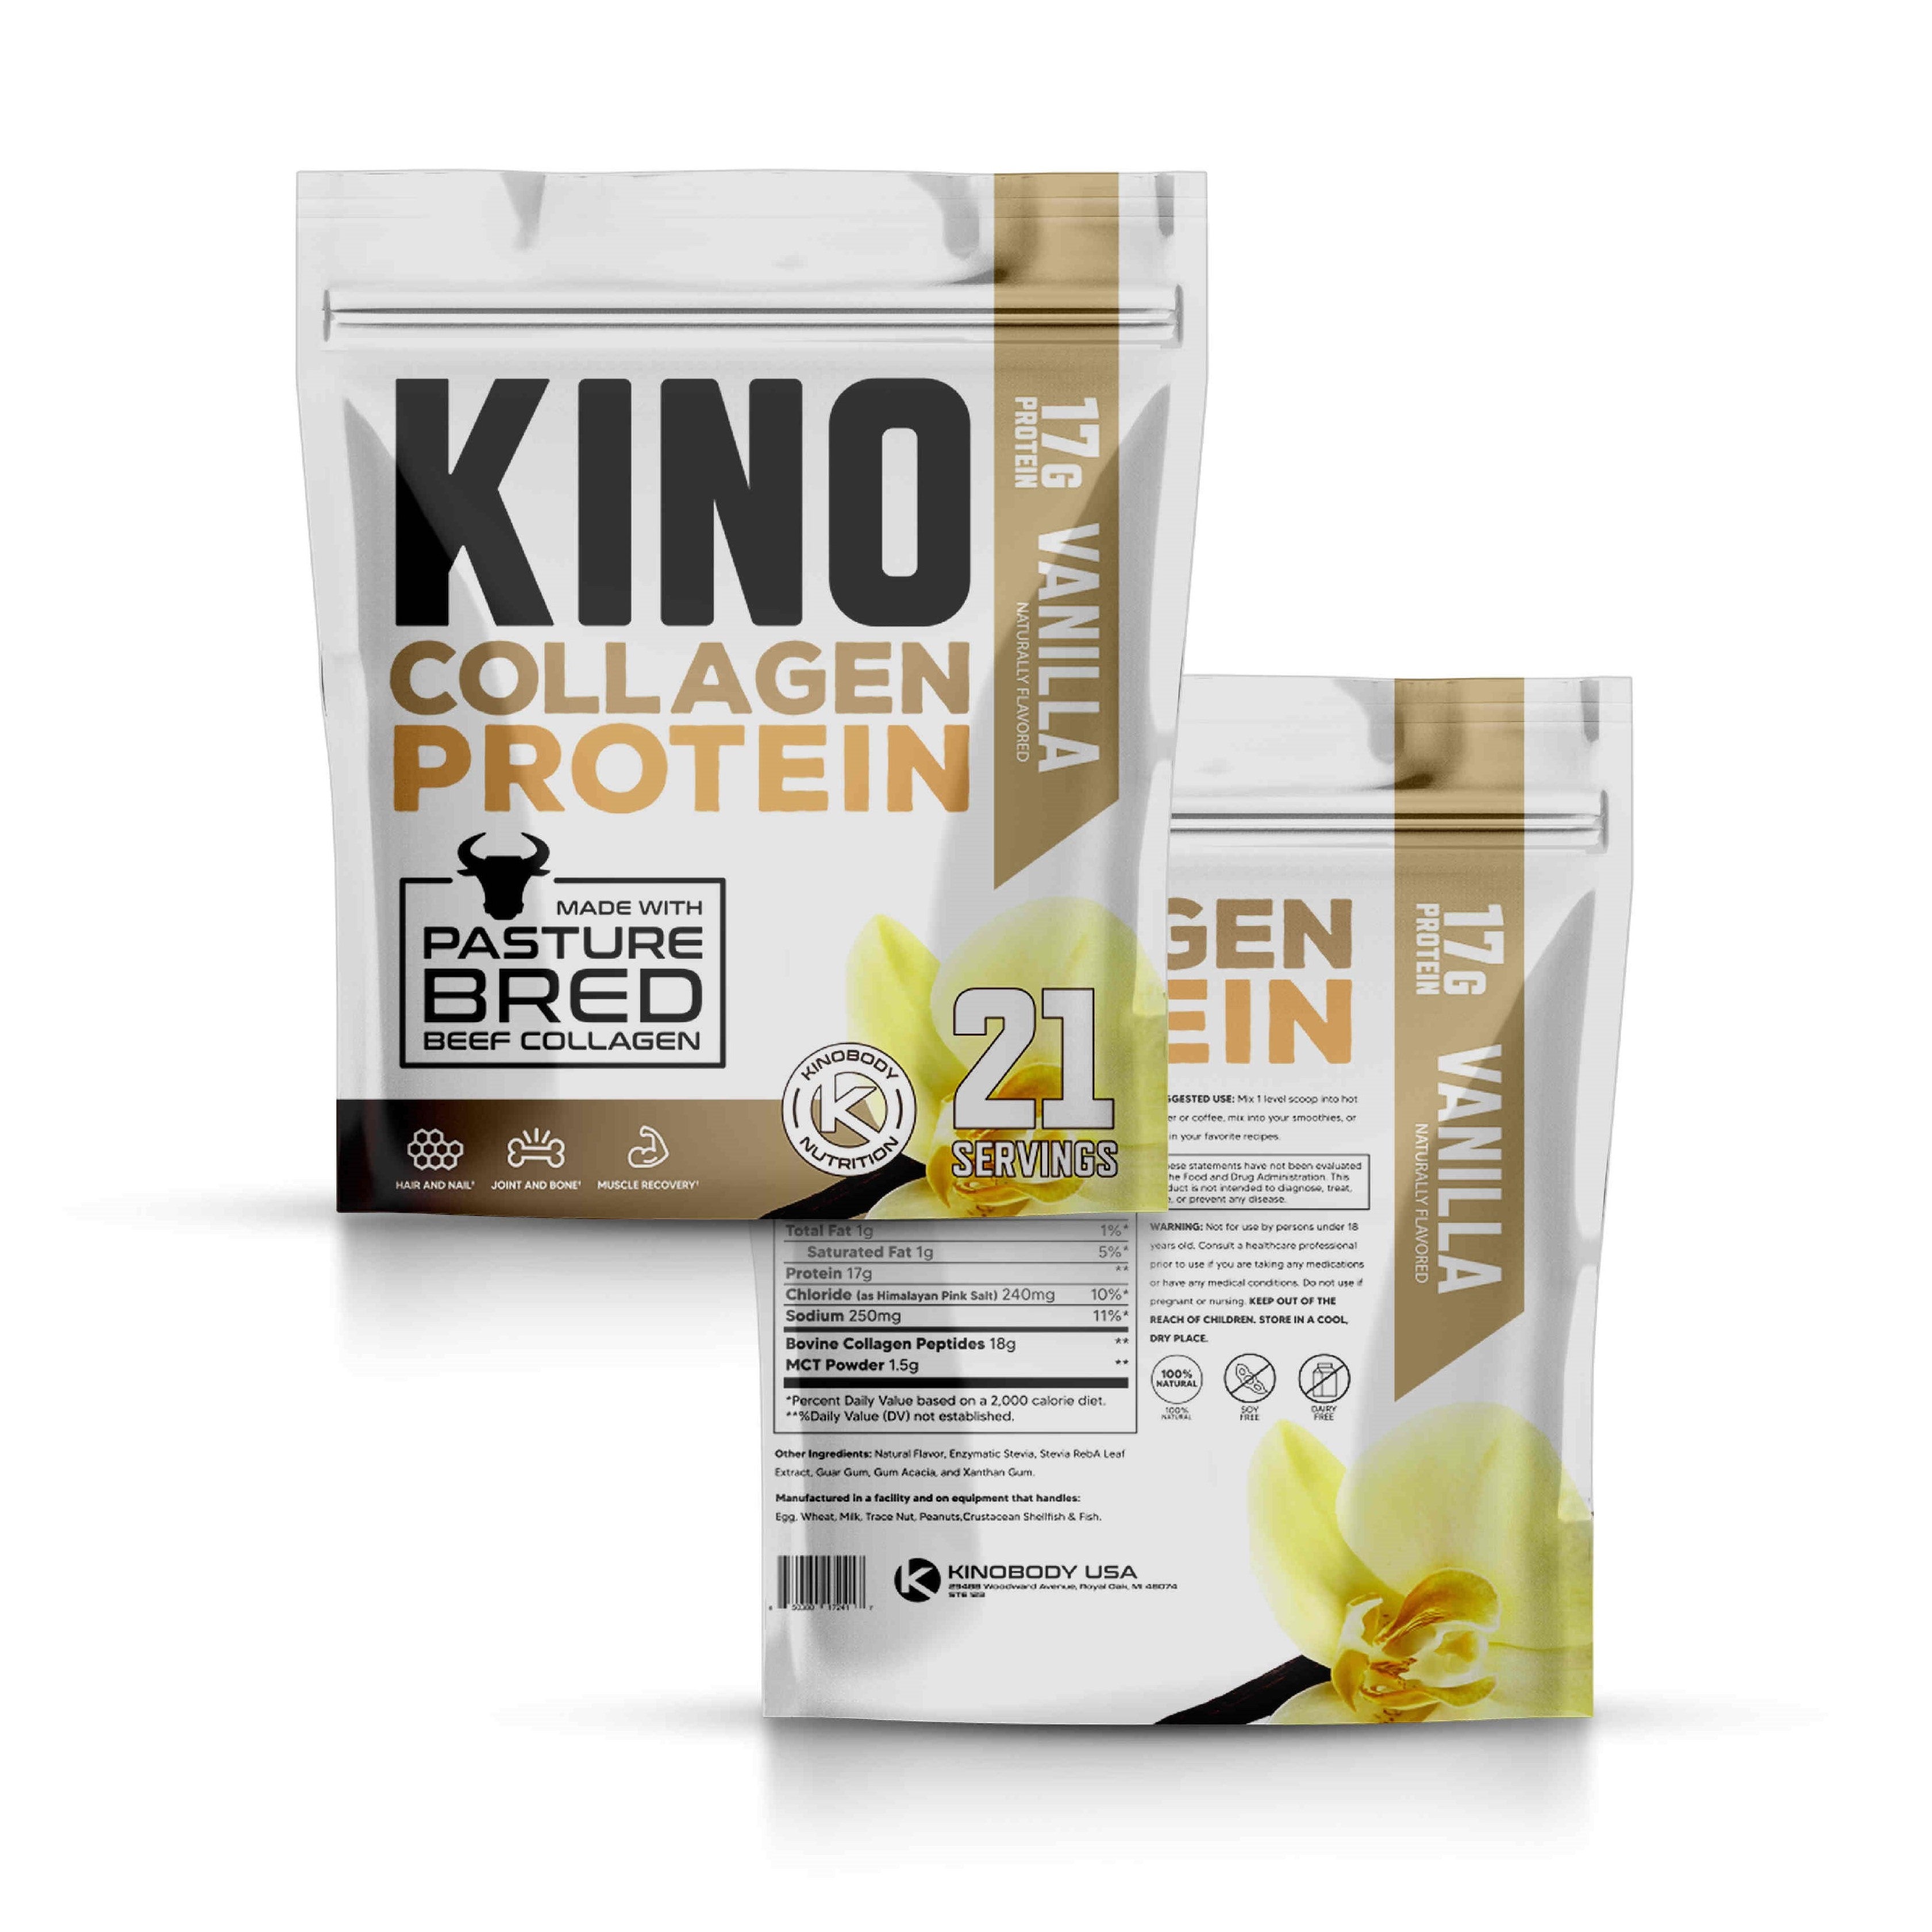 Kino Collagen Protein: Build Muscle & Fortify Your Body